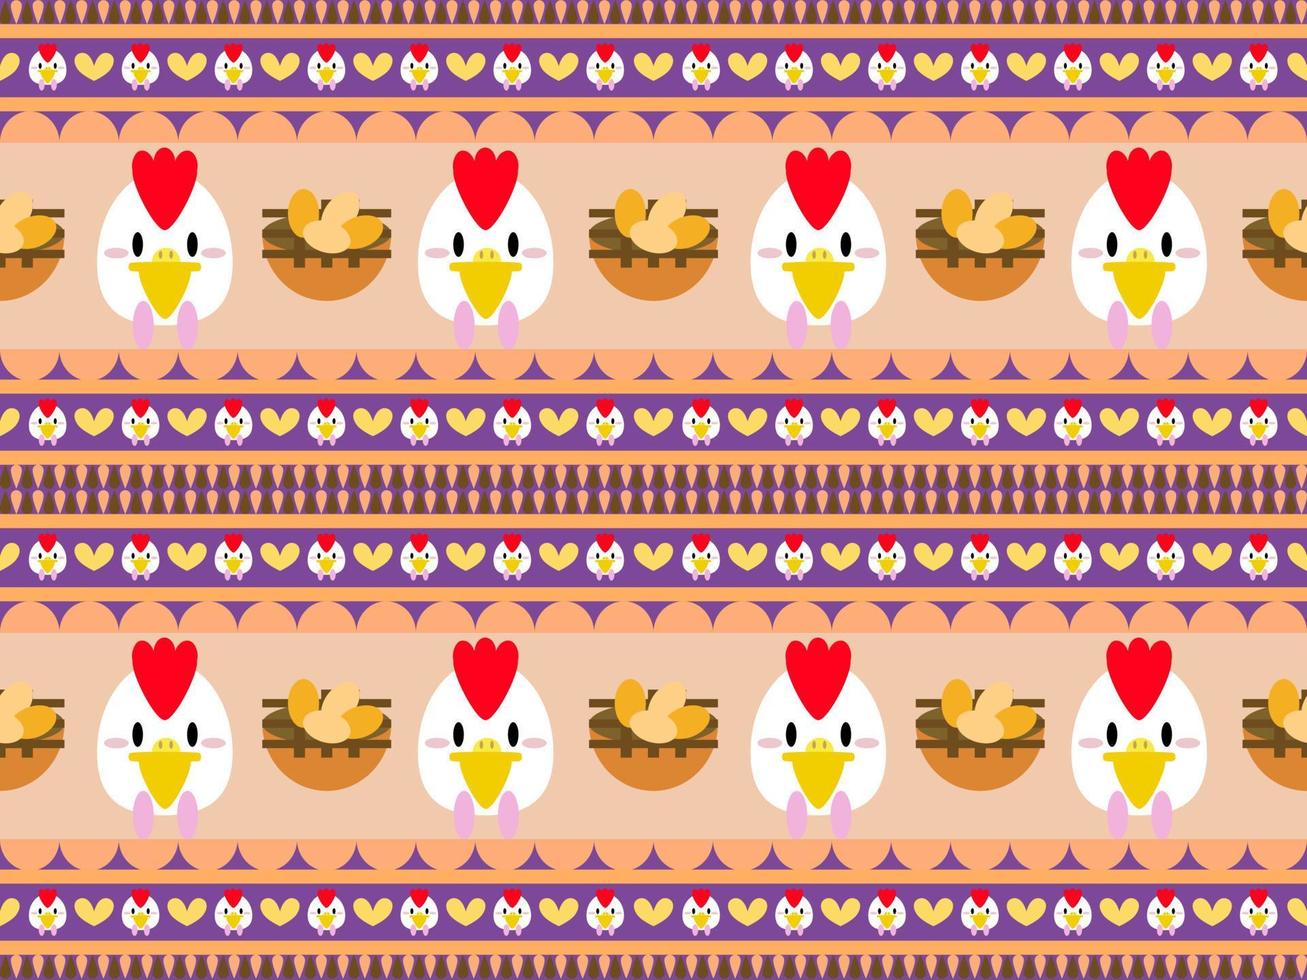 Chicken cartoon character pattern on multicolored background vector